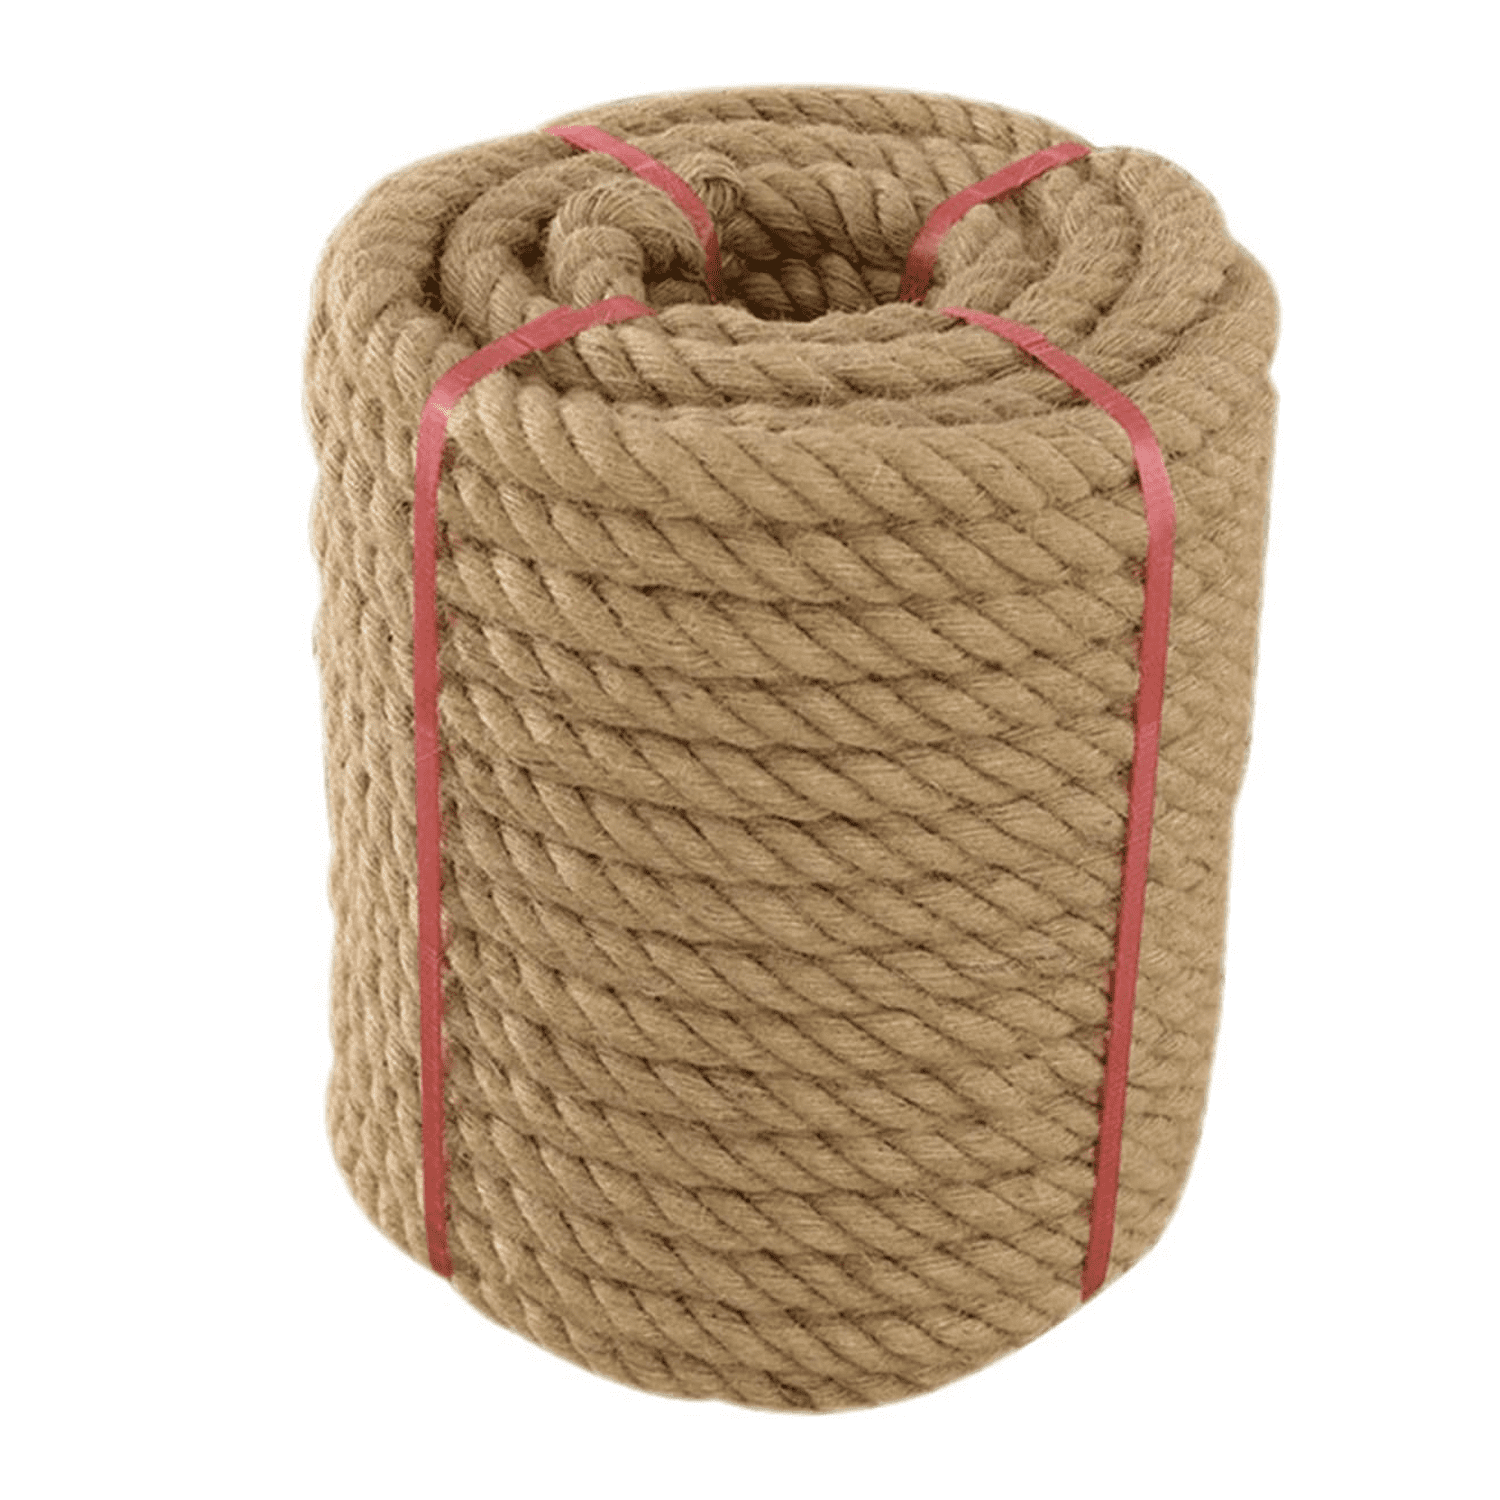 CORDA 1/8 in. x 50 ft. Braided Nylon Paracord Rope at Tractor